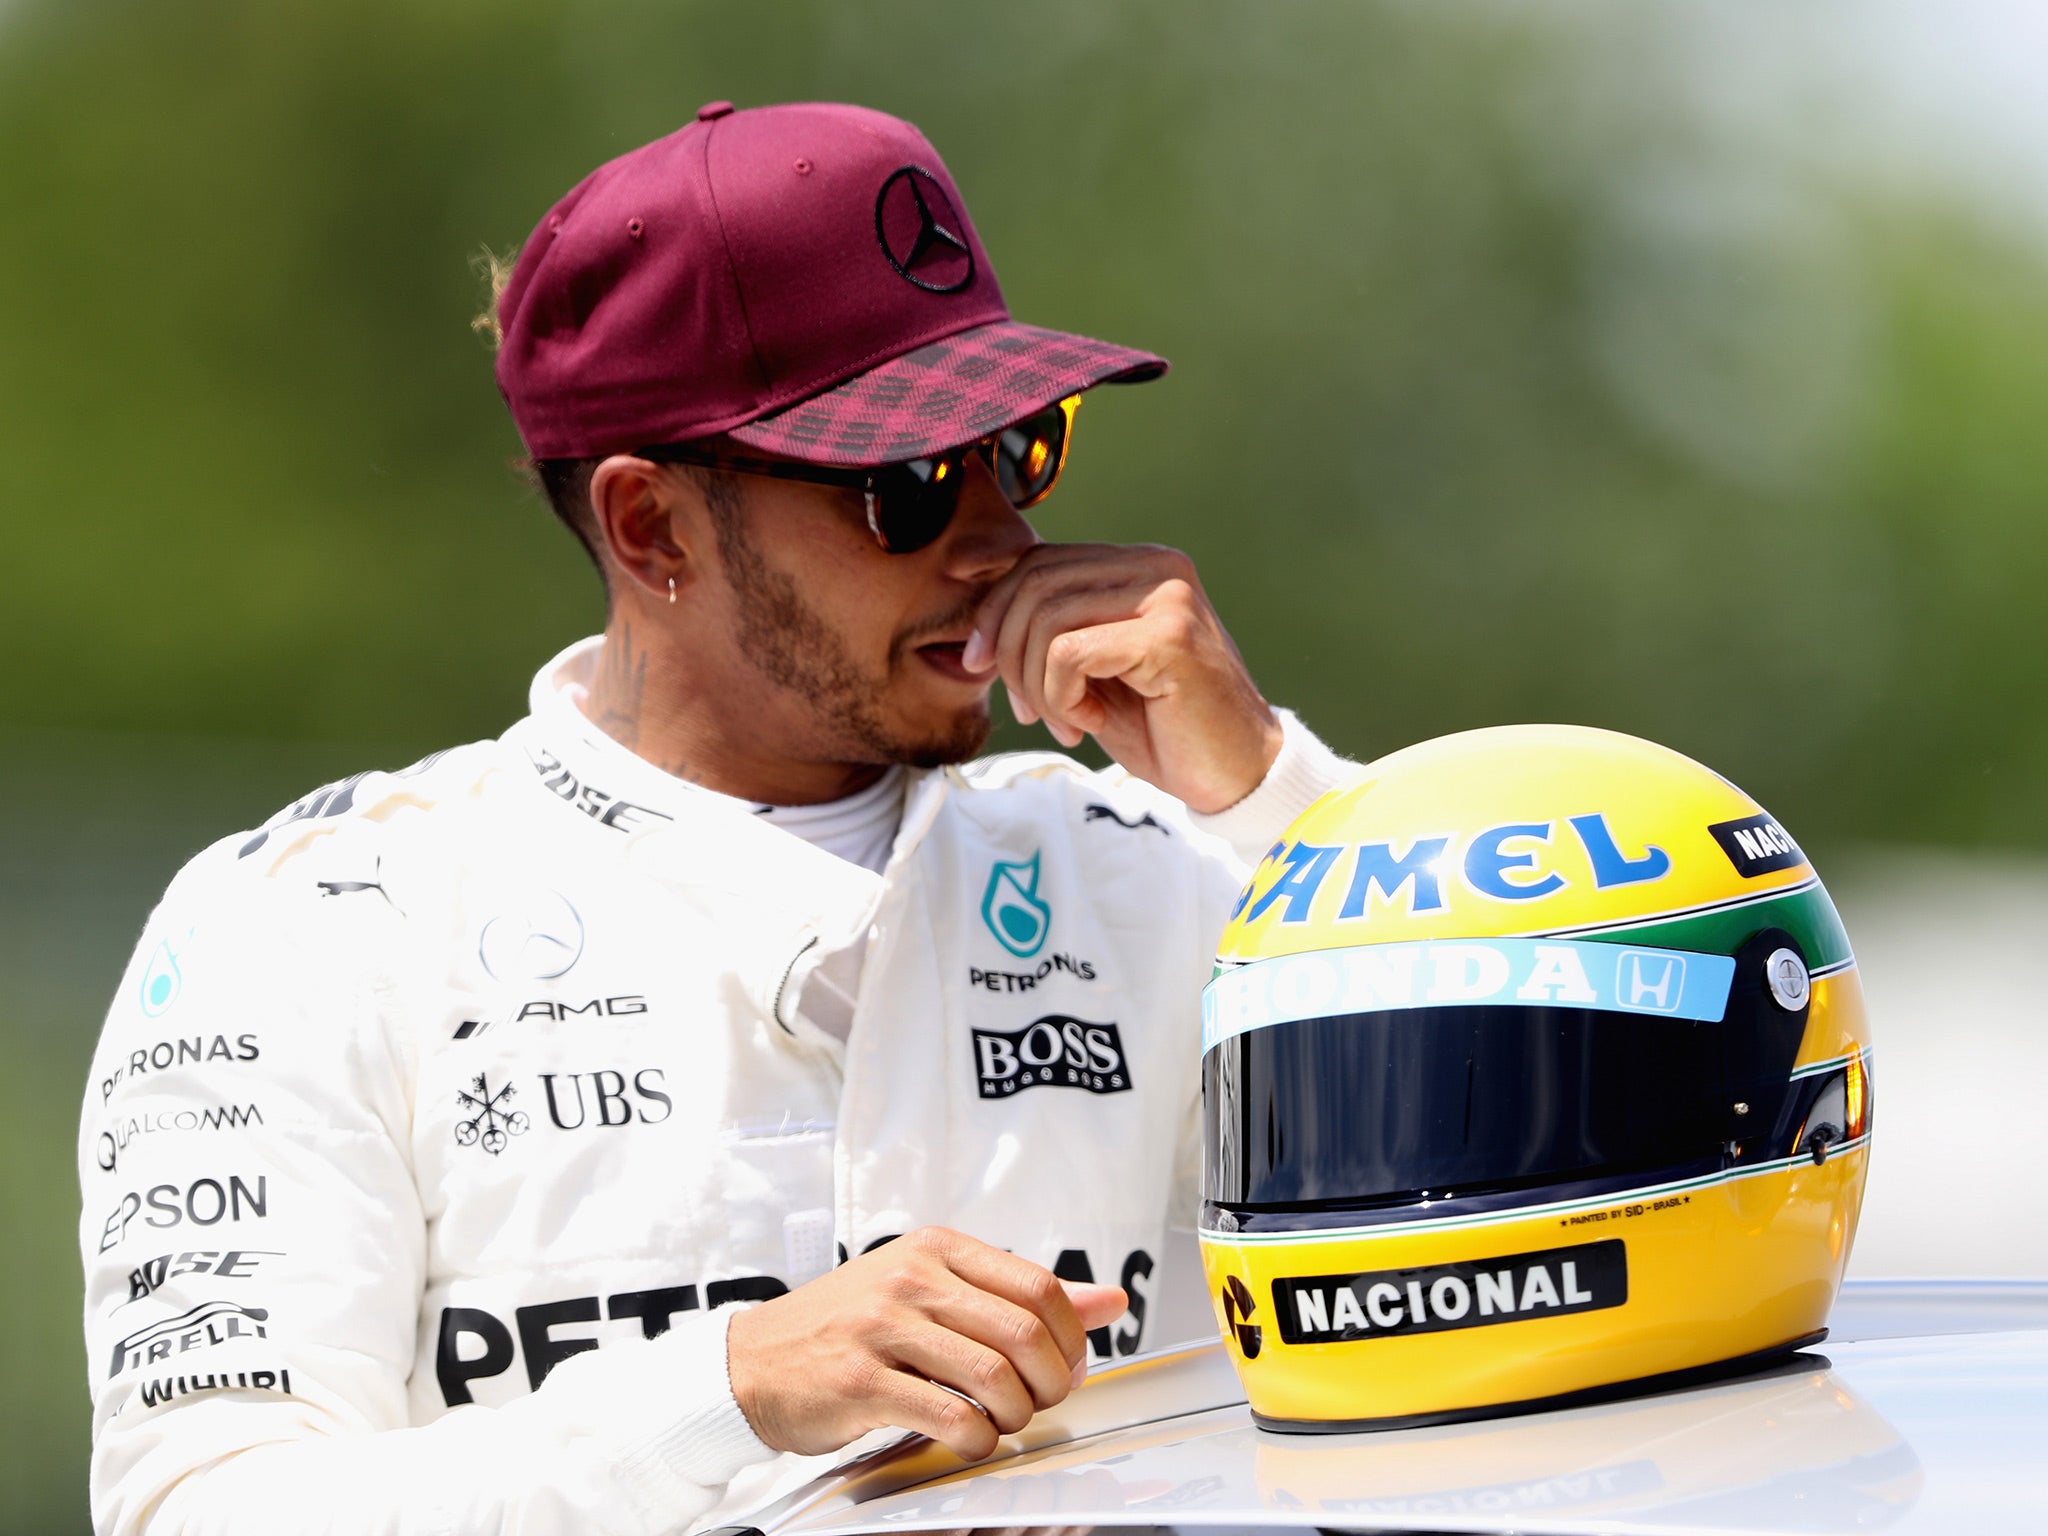 Lewis Hamilton was visibly moved after receiving the gift from Ayrton Senna's family